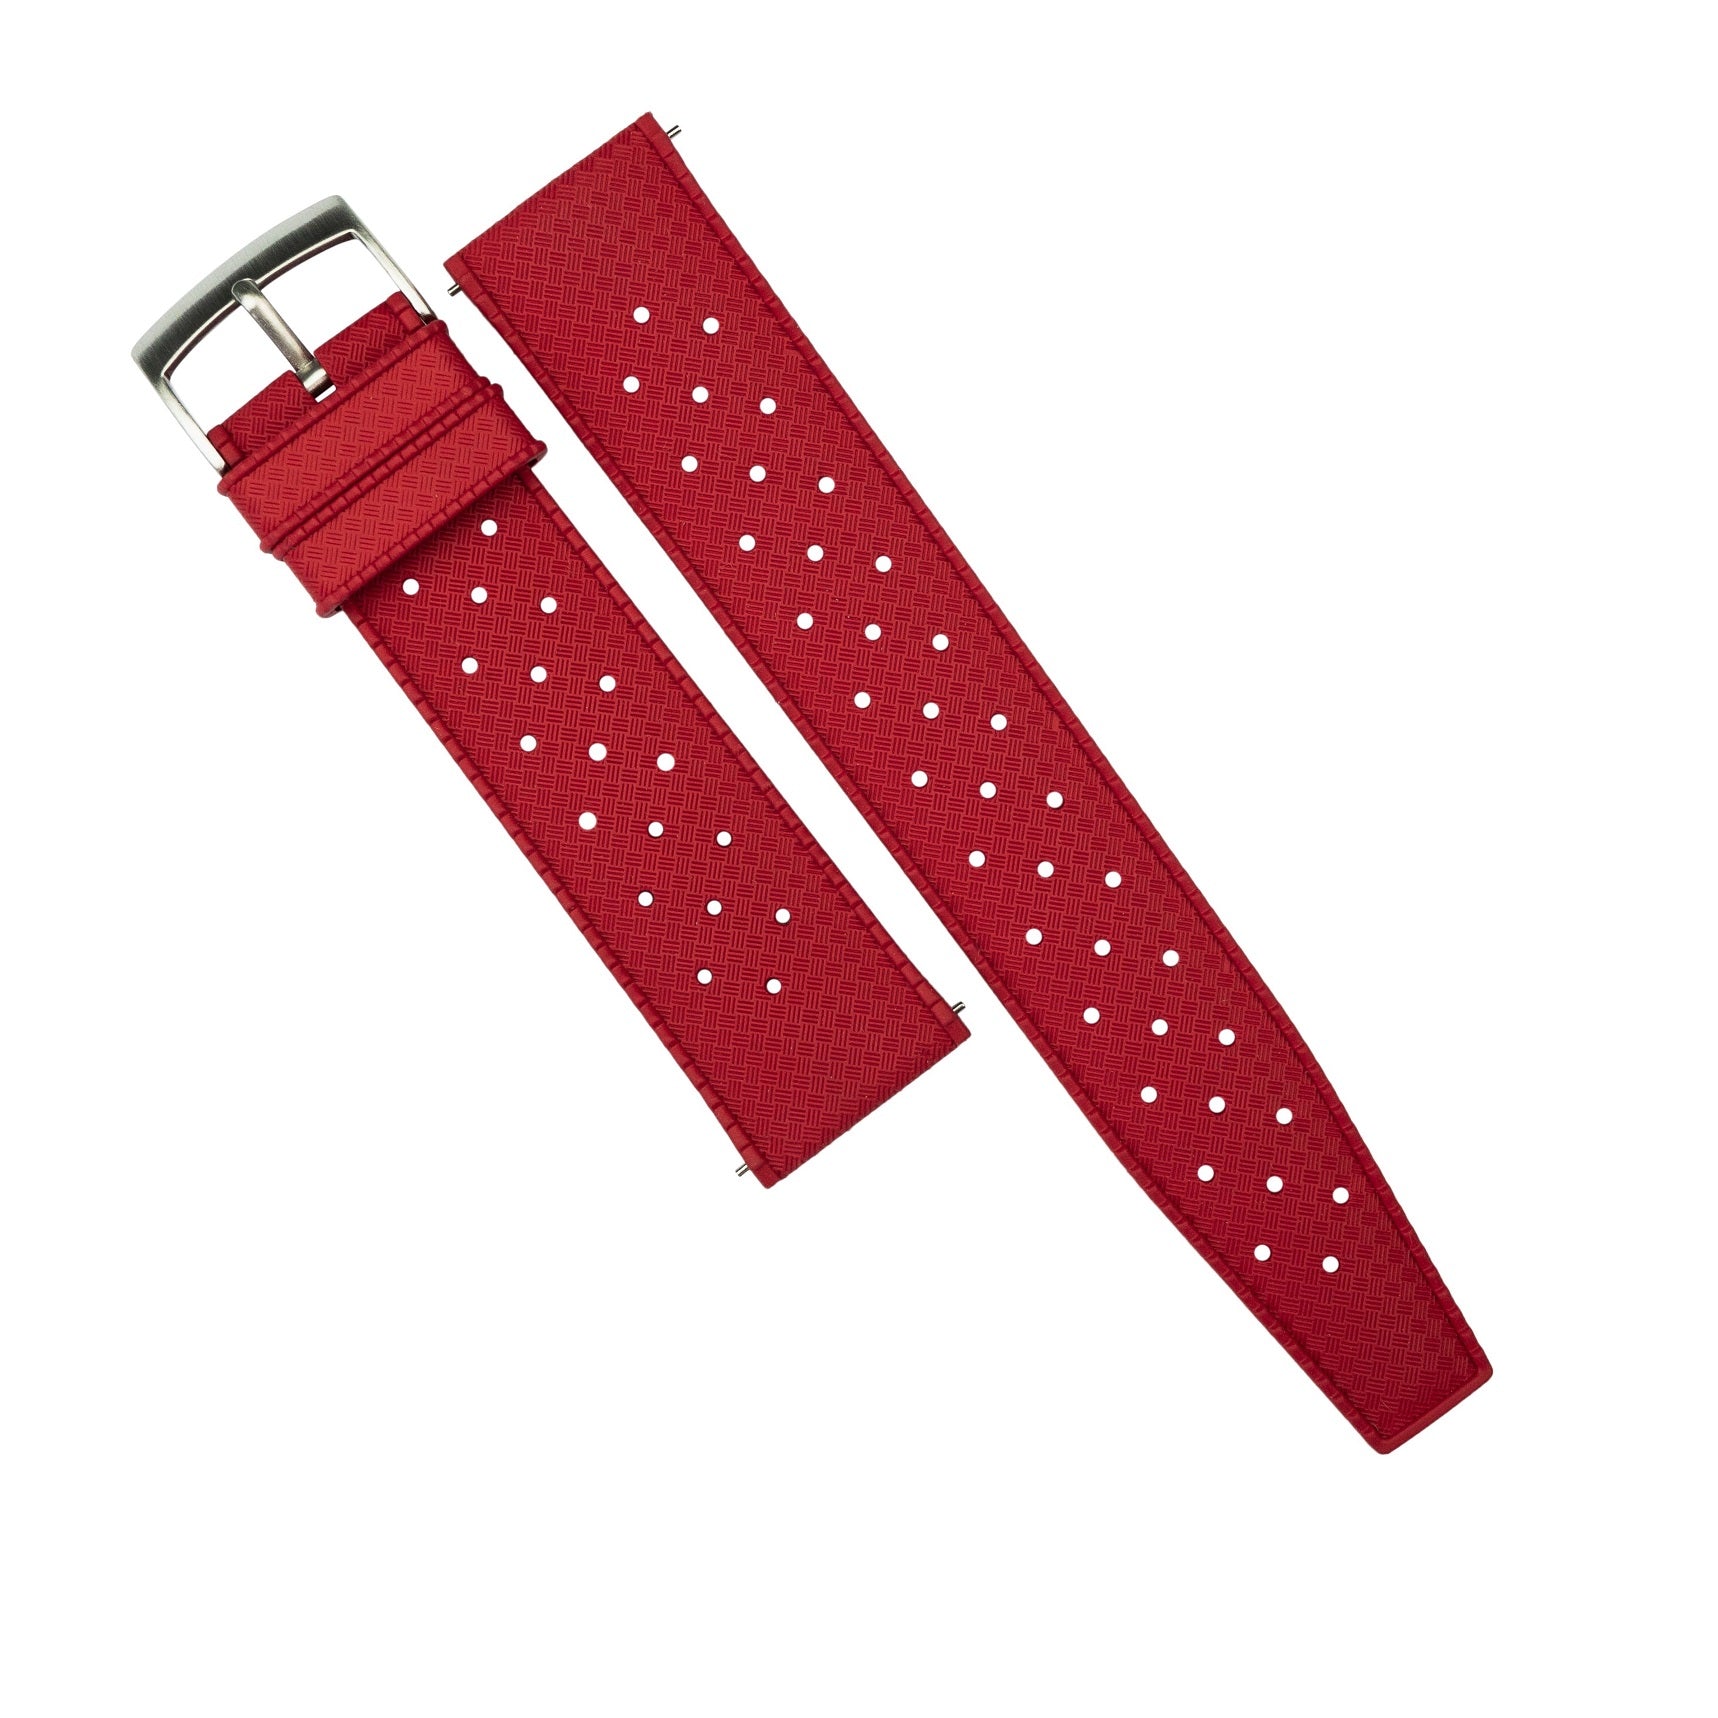 Tropic FKM Rubber Strap in Red (20mm) - Nomad Watch Works Malaysia